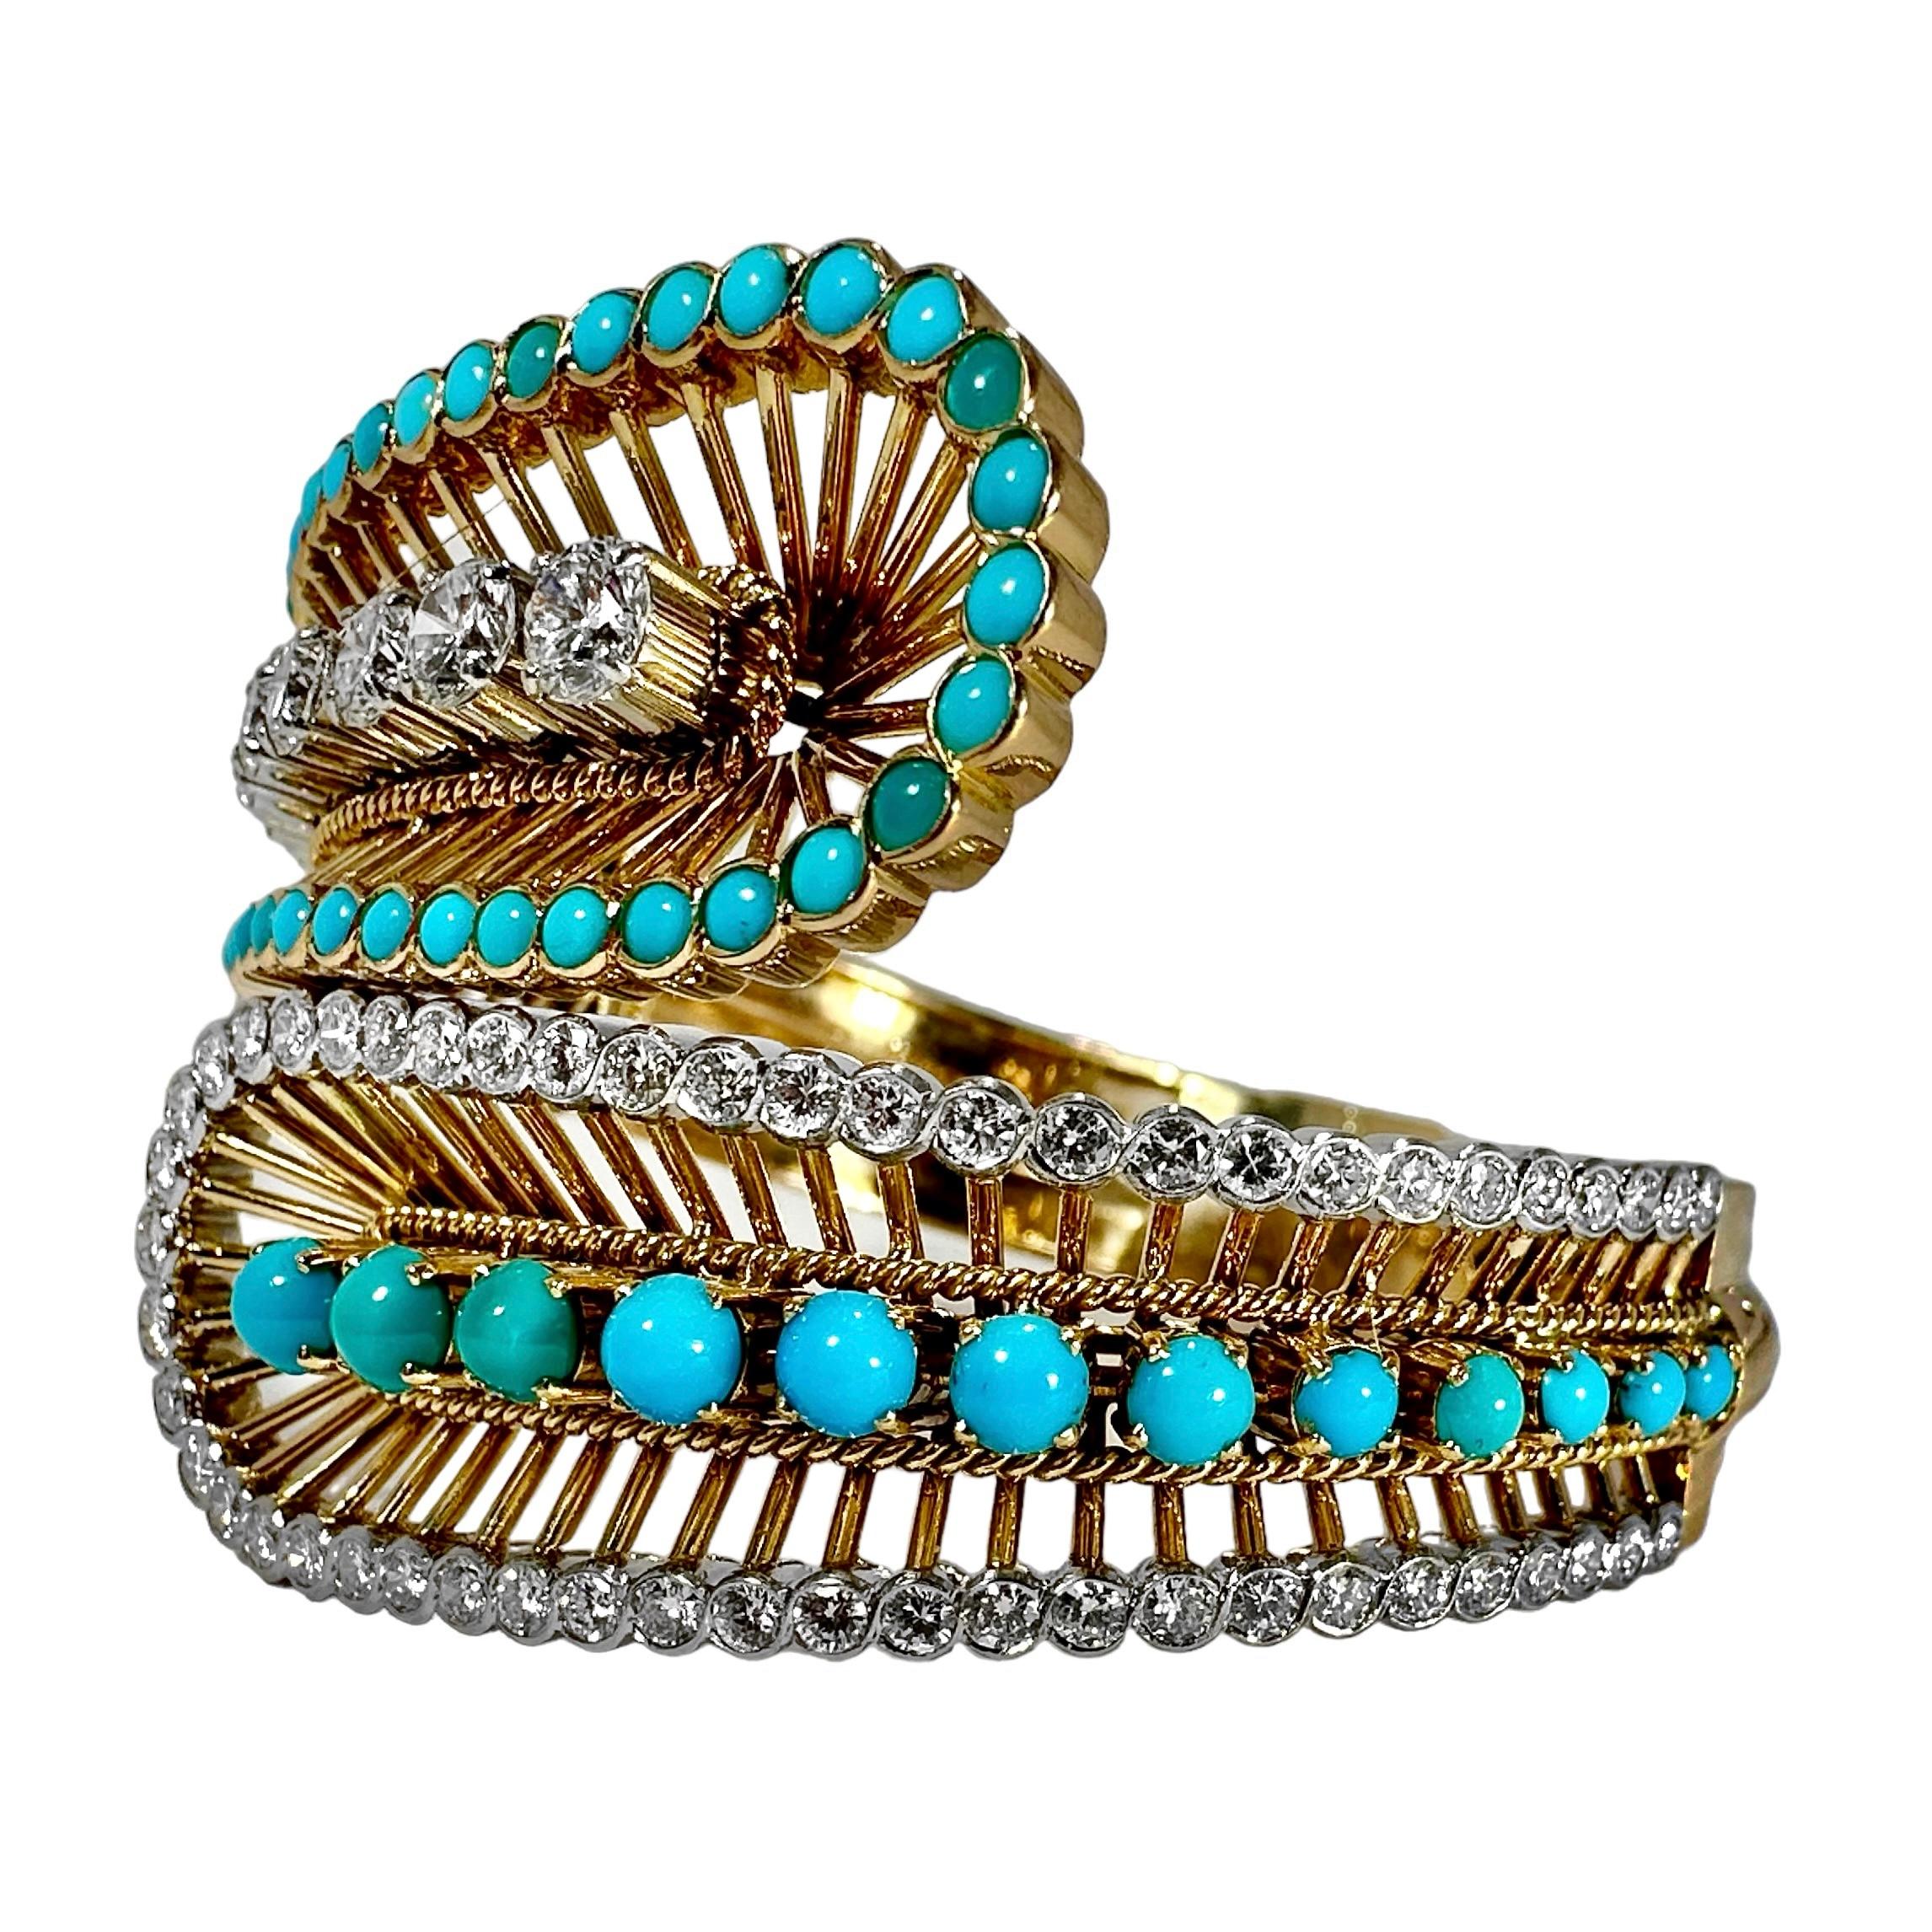 Modern Elegant Wide Bypass Cuff in Gold, Turquoise & Diamonds by Greek Maker VOURAKIS 